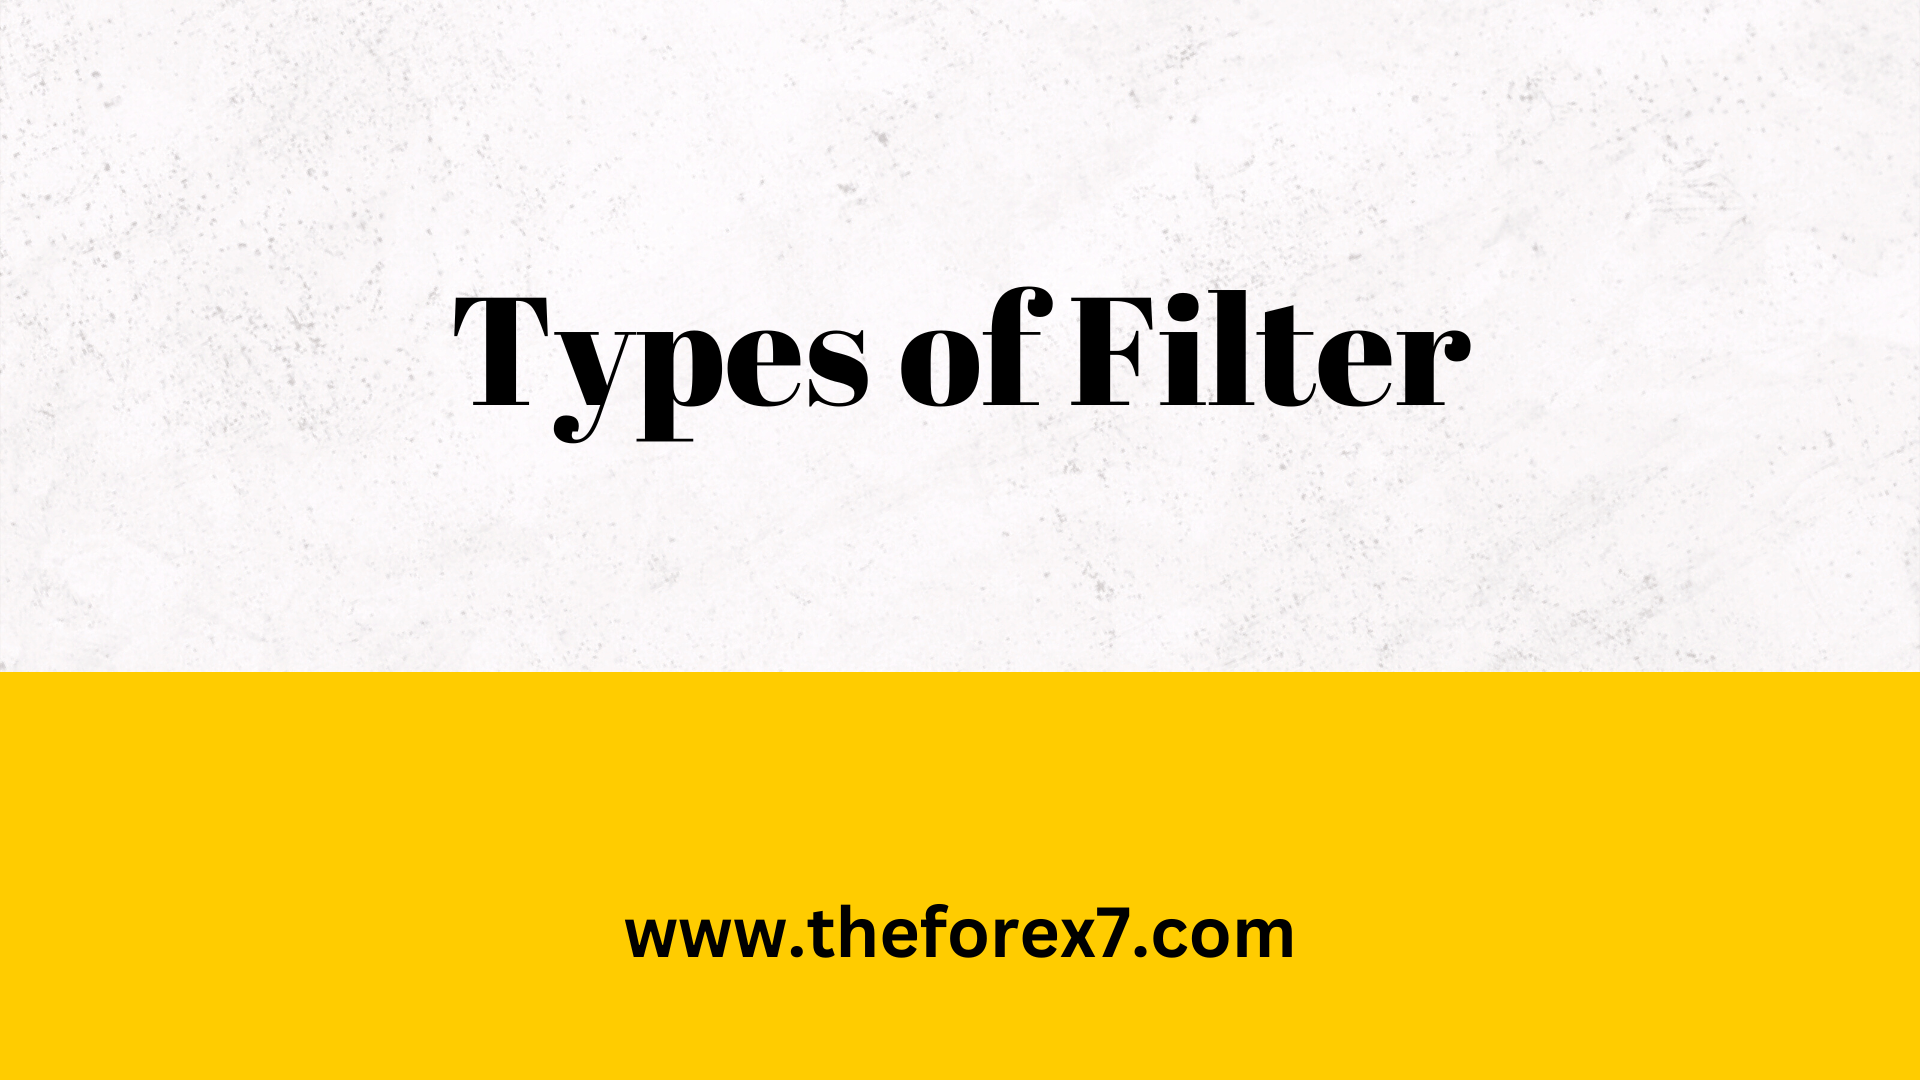 Refining the Filter : Types of Filter and Holding Period